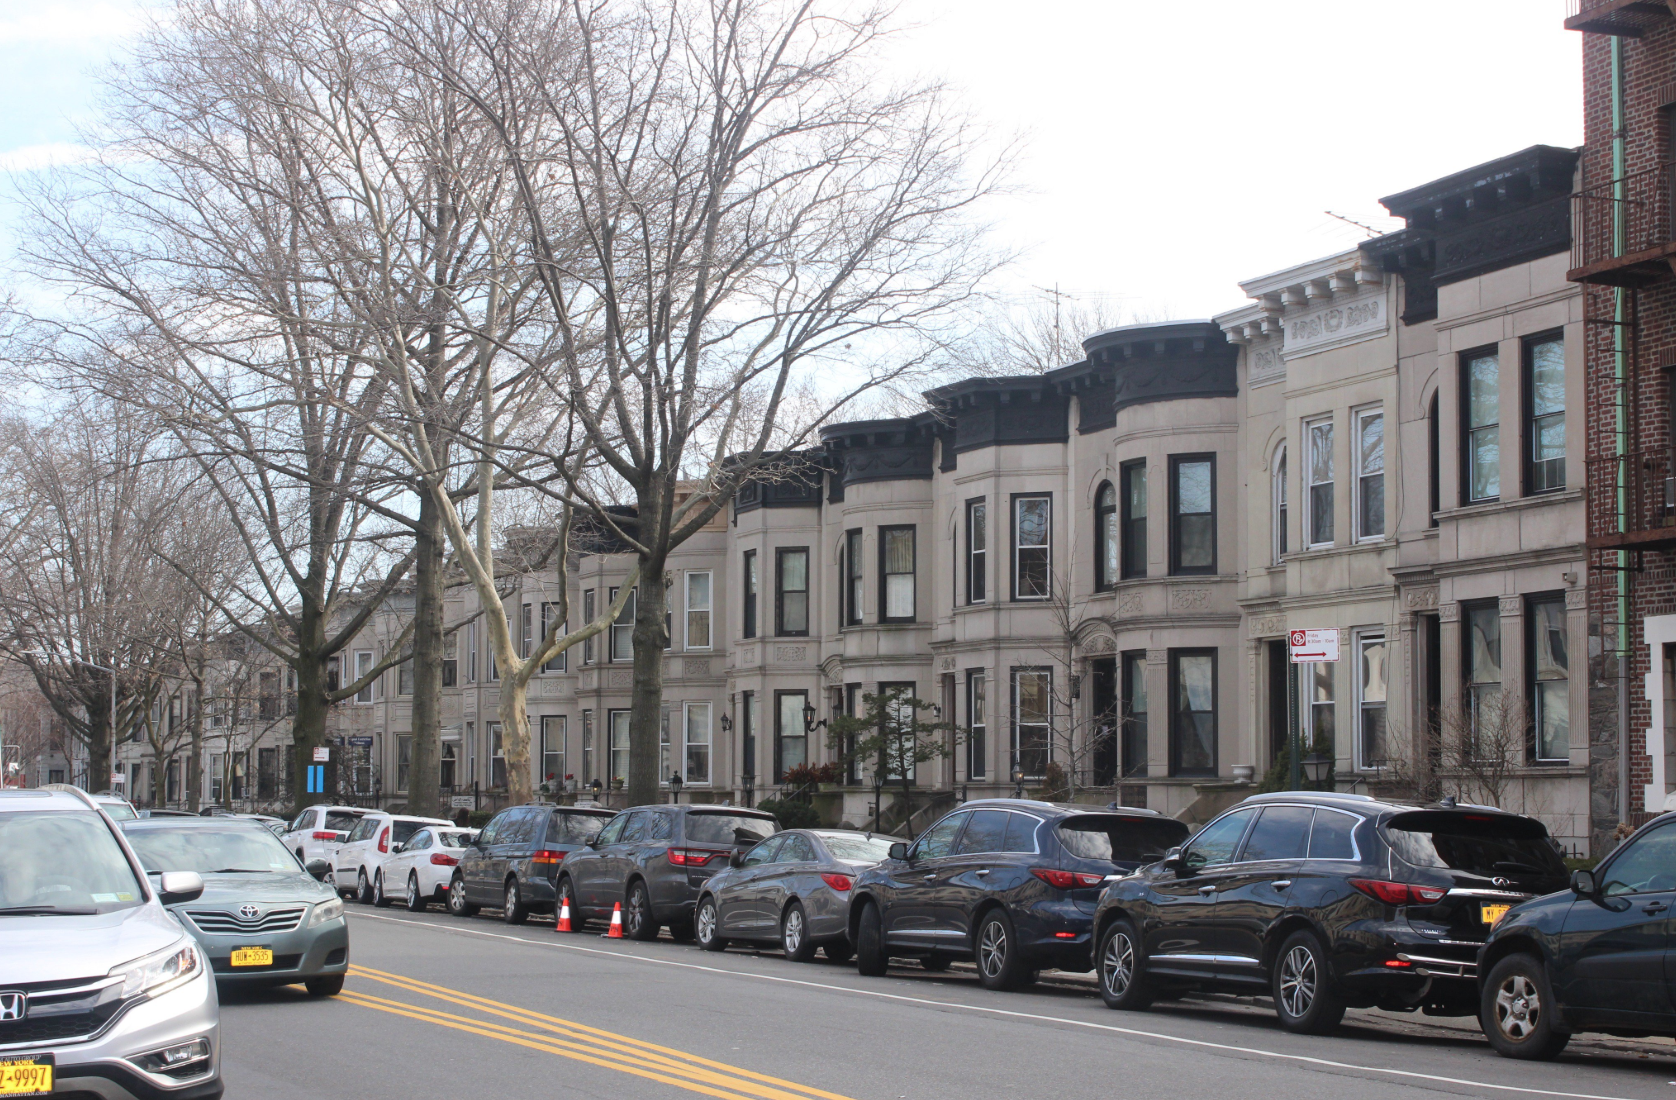 Doctor’s Row Designated As Bay Ridge’s First Historic District